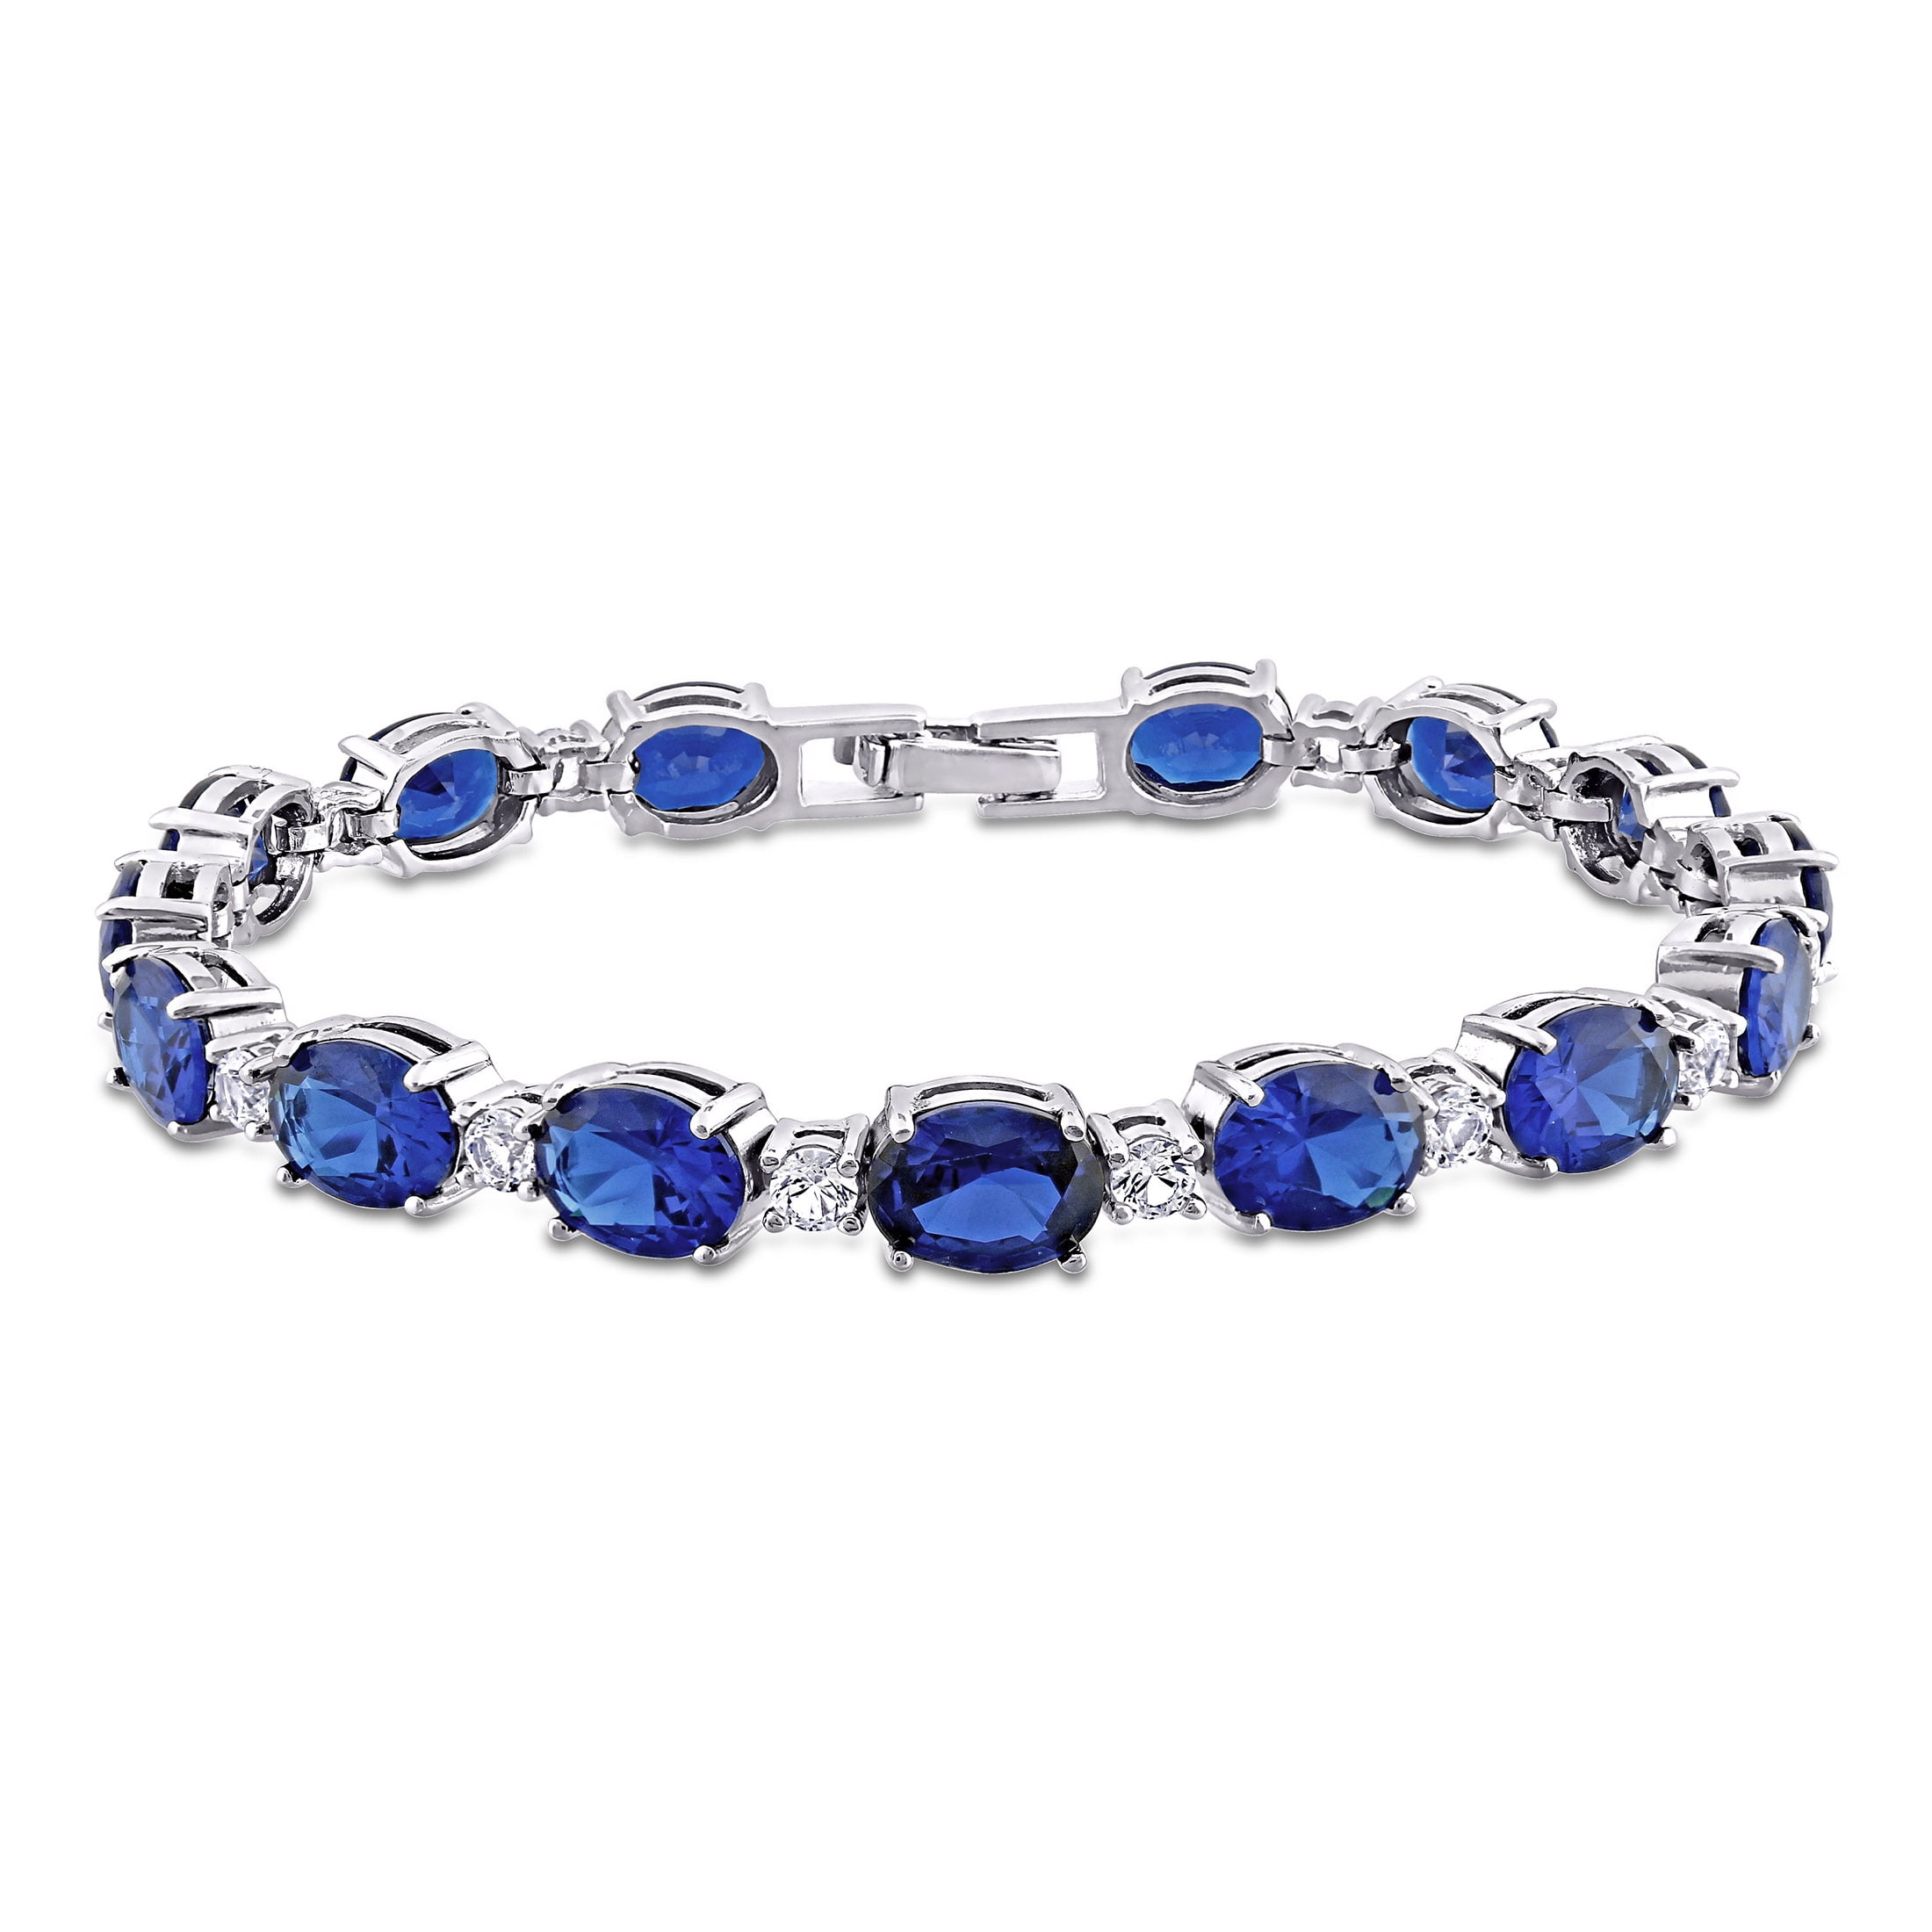 Lab-Created Blue Sapphire Tennis Bracelet in Sterling Silver - 7.5